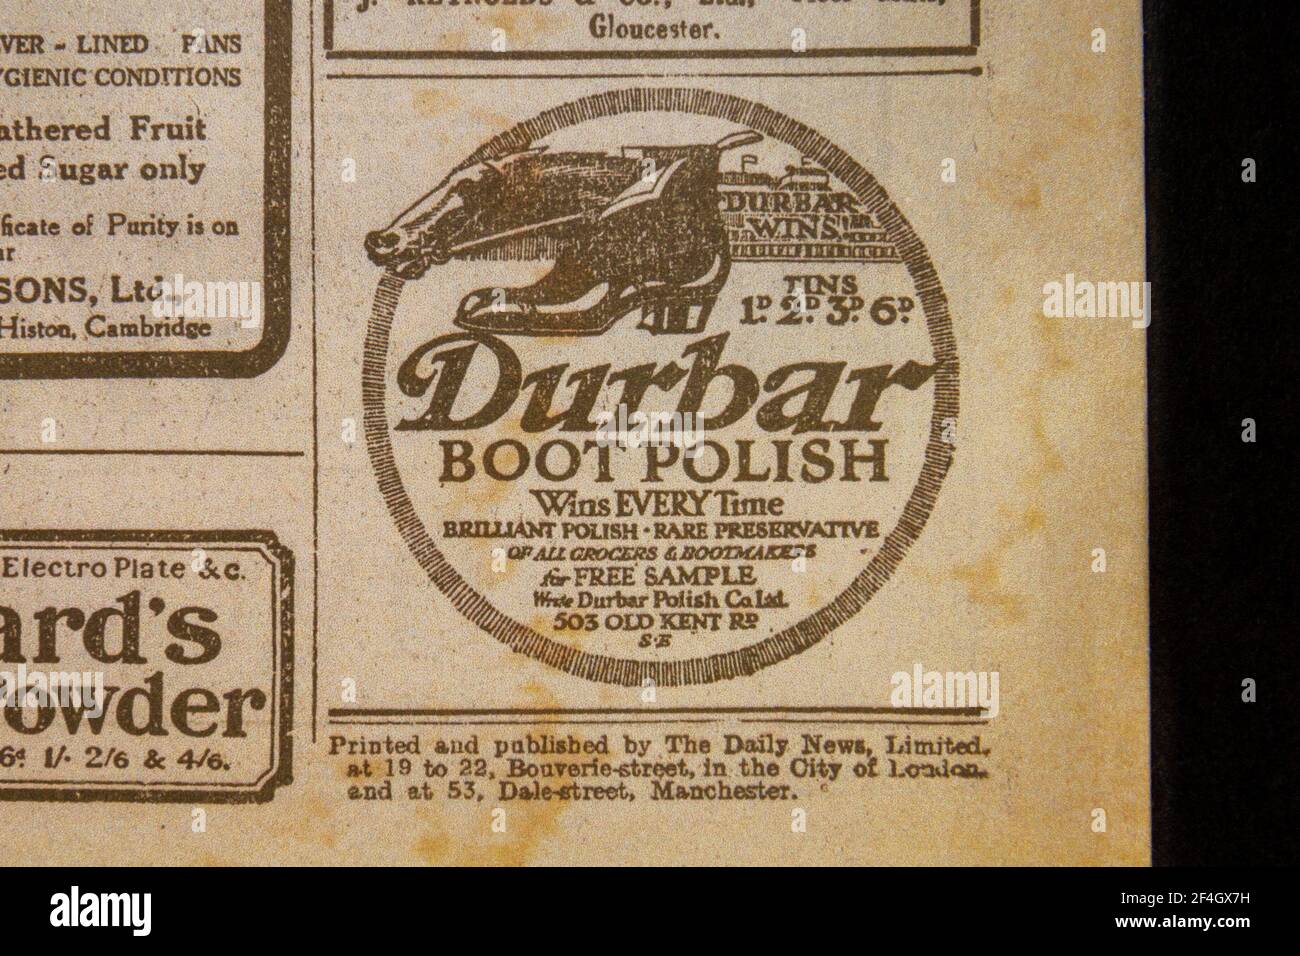 Advert Dunbar Boot Polish for in the Daily News & Reader newspaper on 5th Aug 1914. Stock Photo